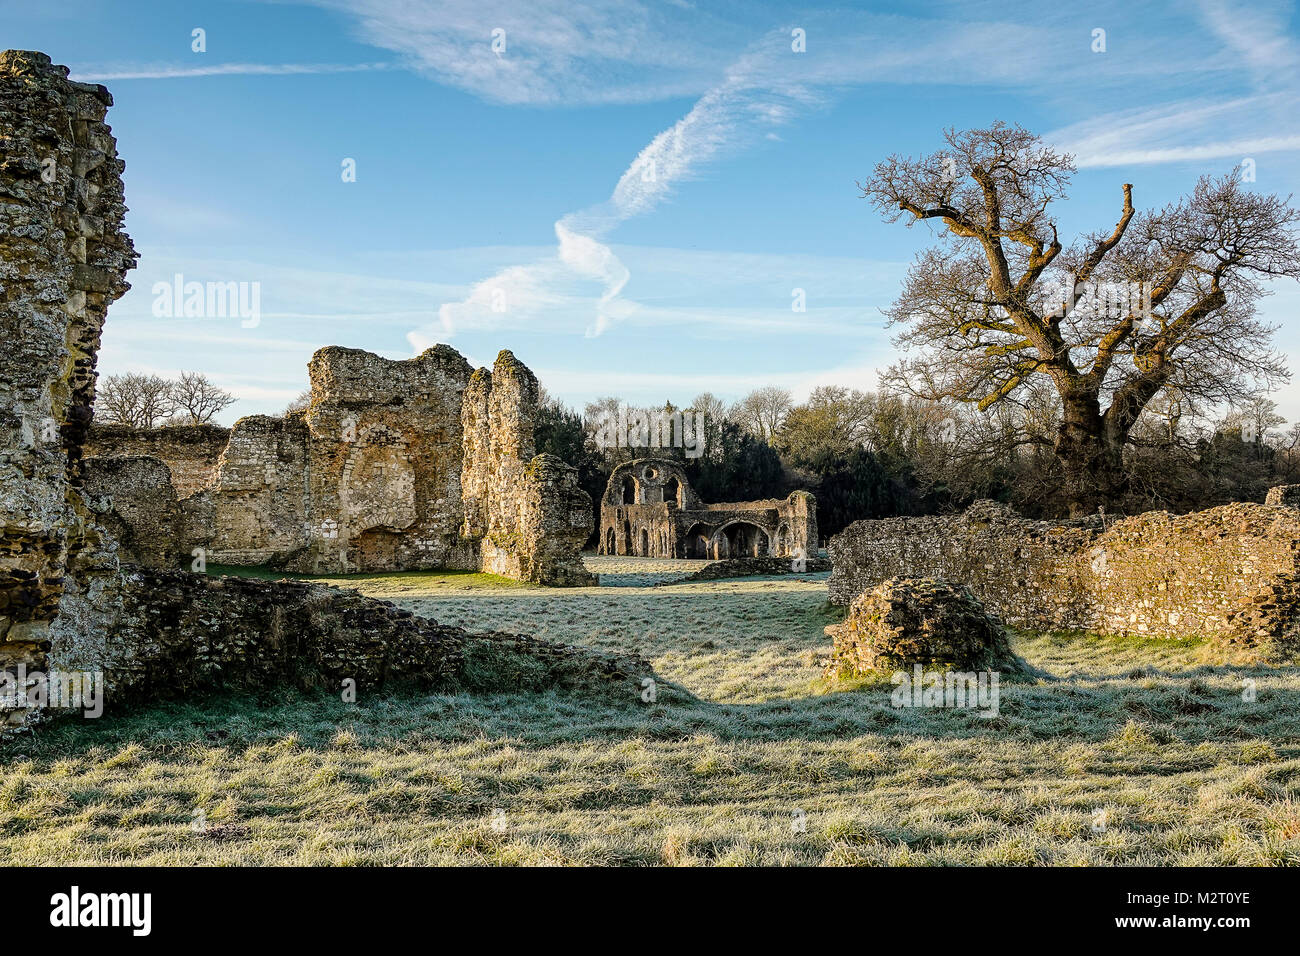 Waverley Lane, Farnham. 08th February 2018. A bitterly cold start to the day for the Home Counties with sub-zero temperatures. Frosty conditions at Waverley Abbey near Farnham in Surrey. Credit: james jagger/Alamy Live News Stock Photo